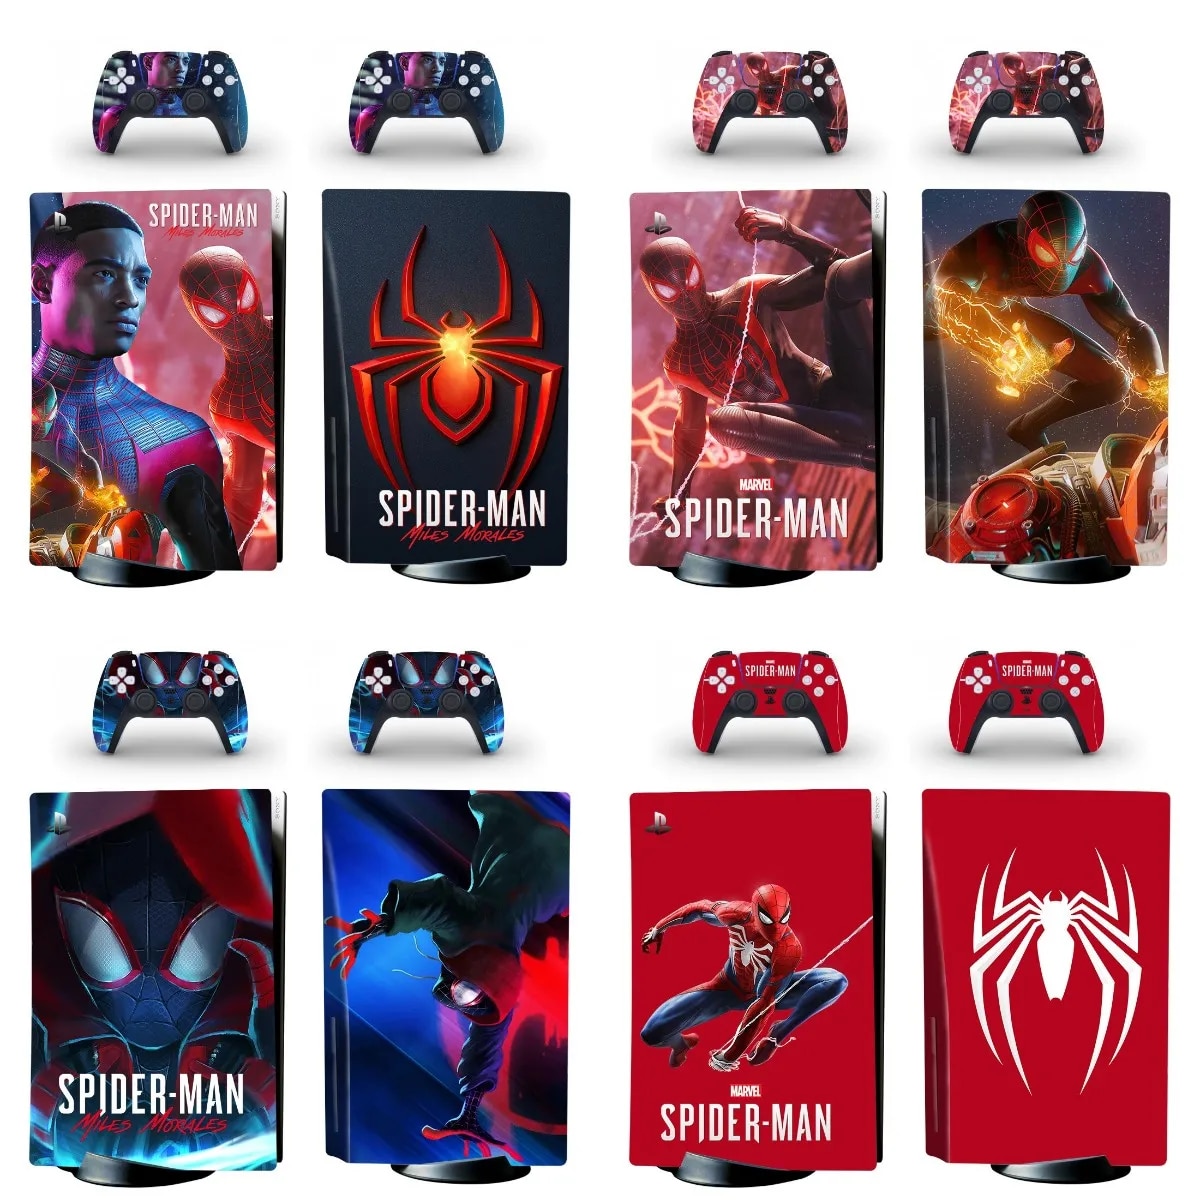 【Support-Cod】 Spider Ps5 Disk Skin Sticker Decal Cover For 5 Console And 2 Controllers Ps5 Disc Edition Sticker Vinyl